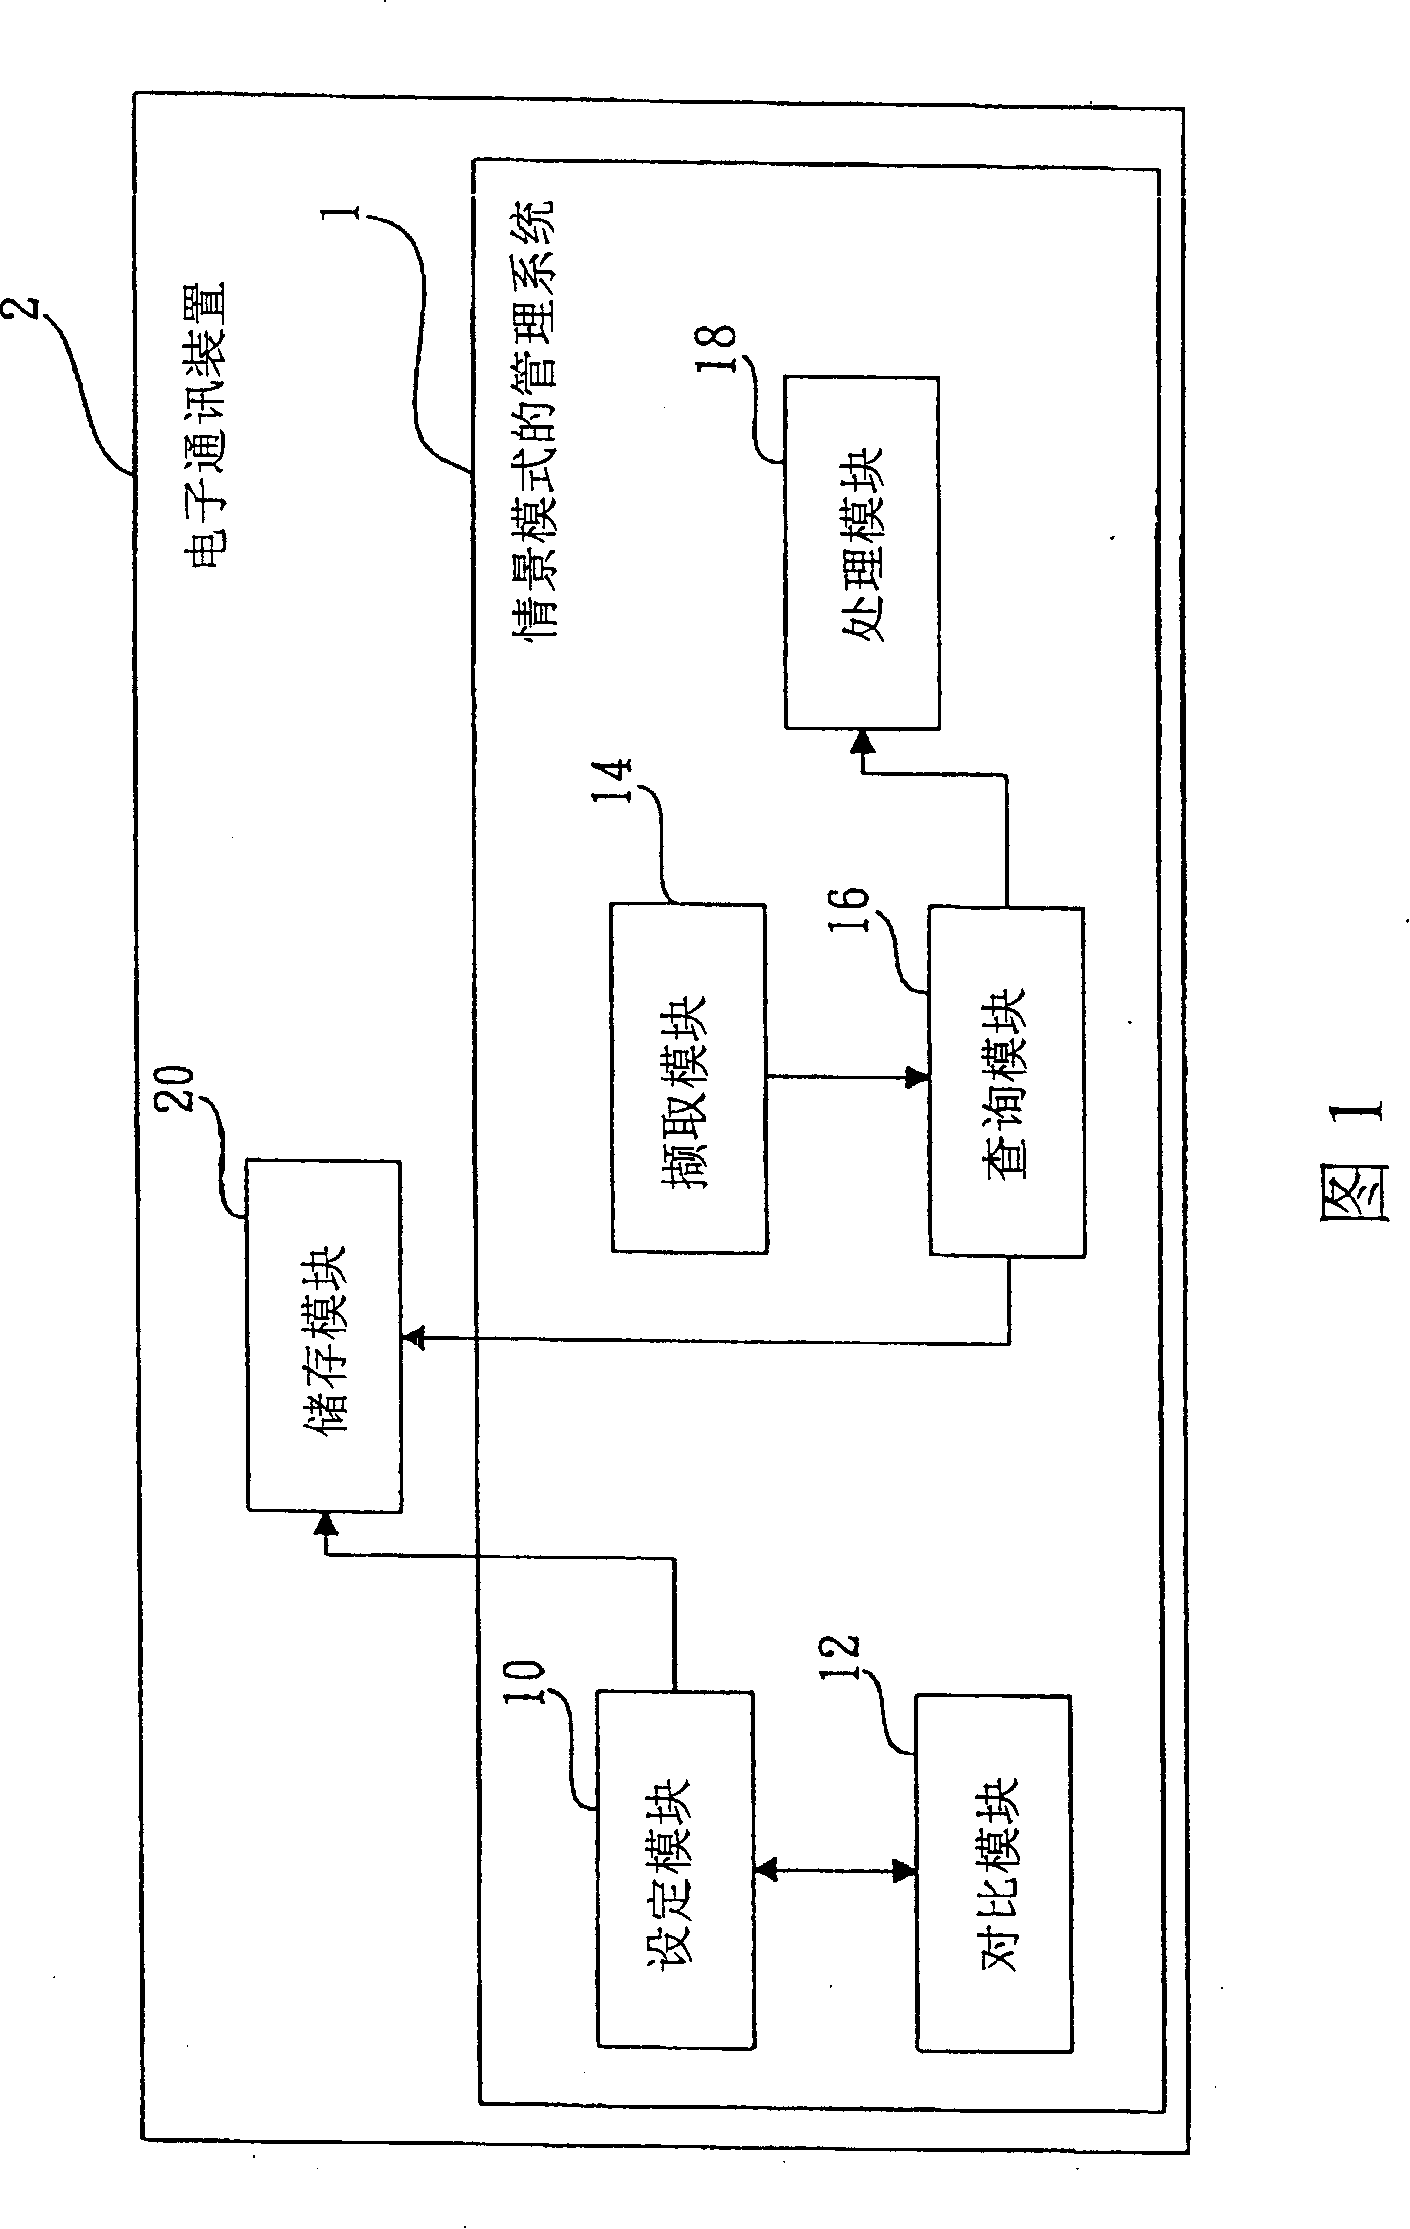 System and method for managing contextual model